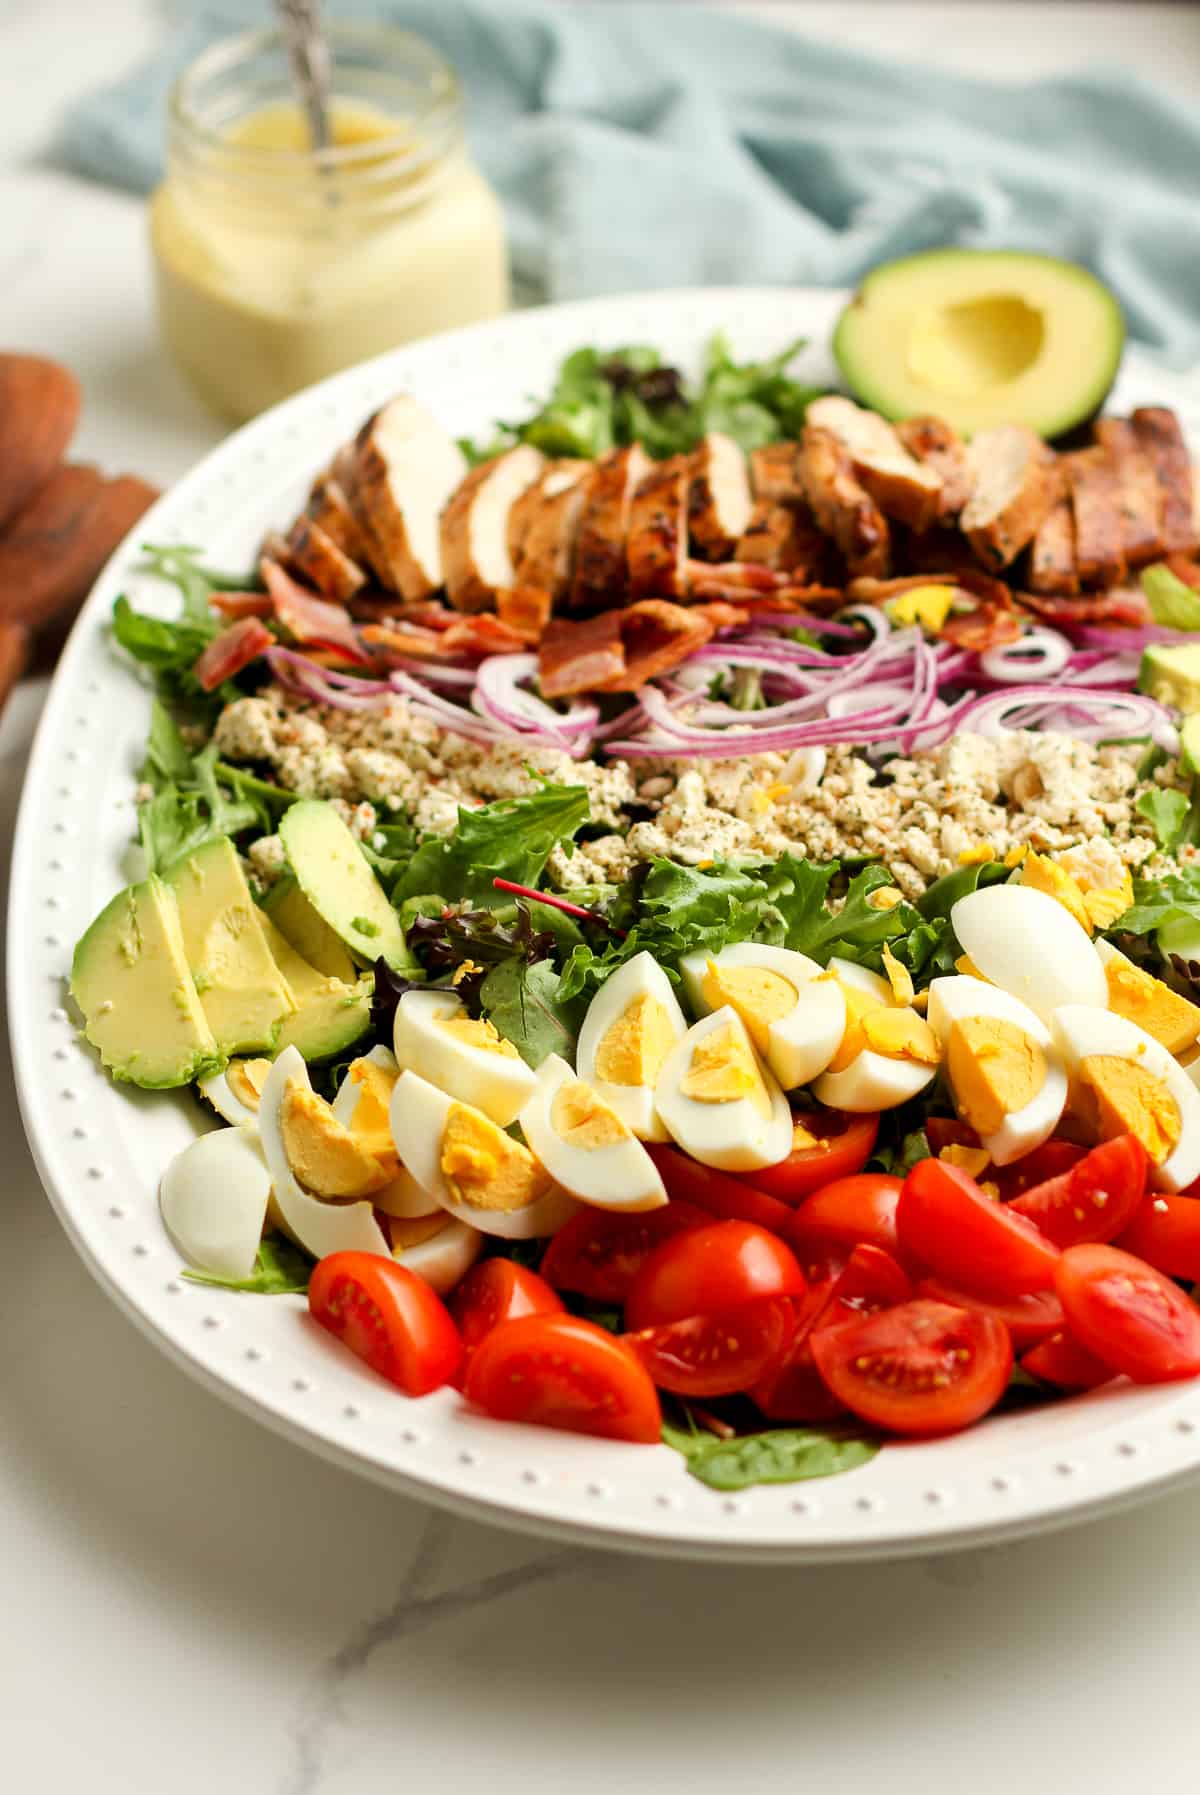 Side view of the platter of salad, with a jar of dressing.